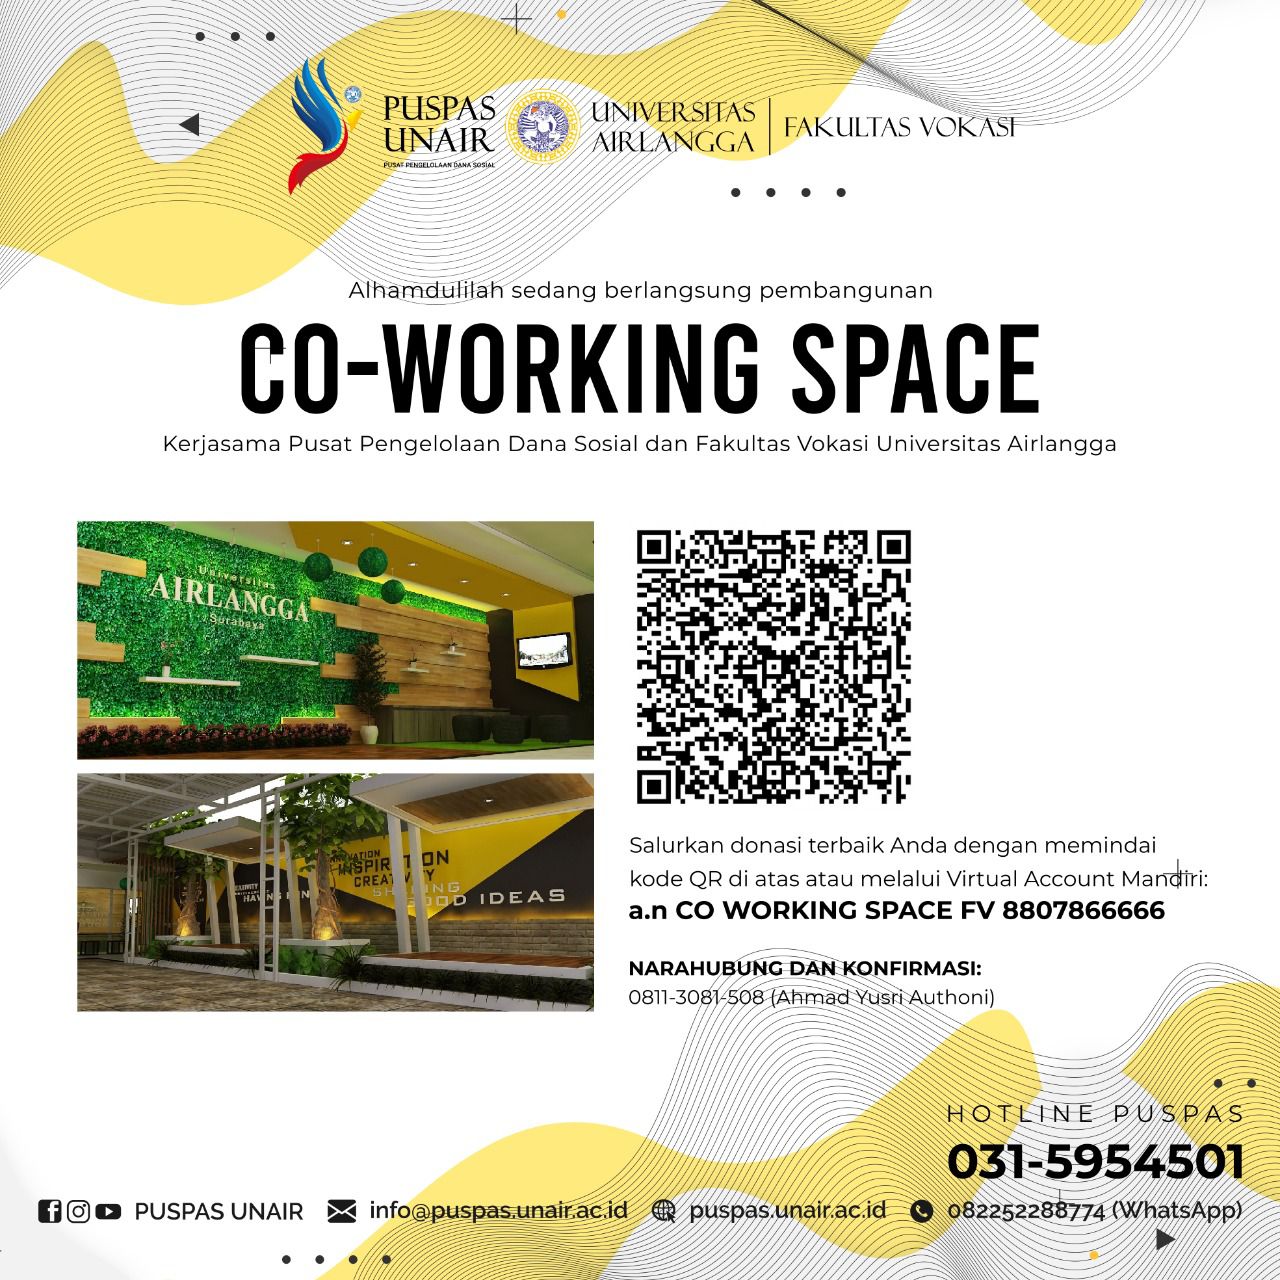 Construction of CO-WORKING Space Faculty of Vocational School